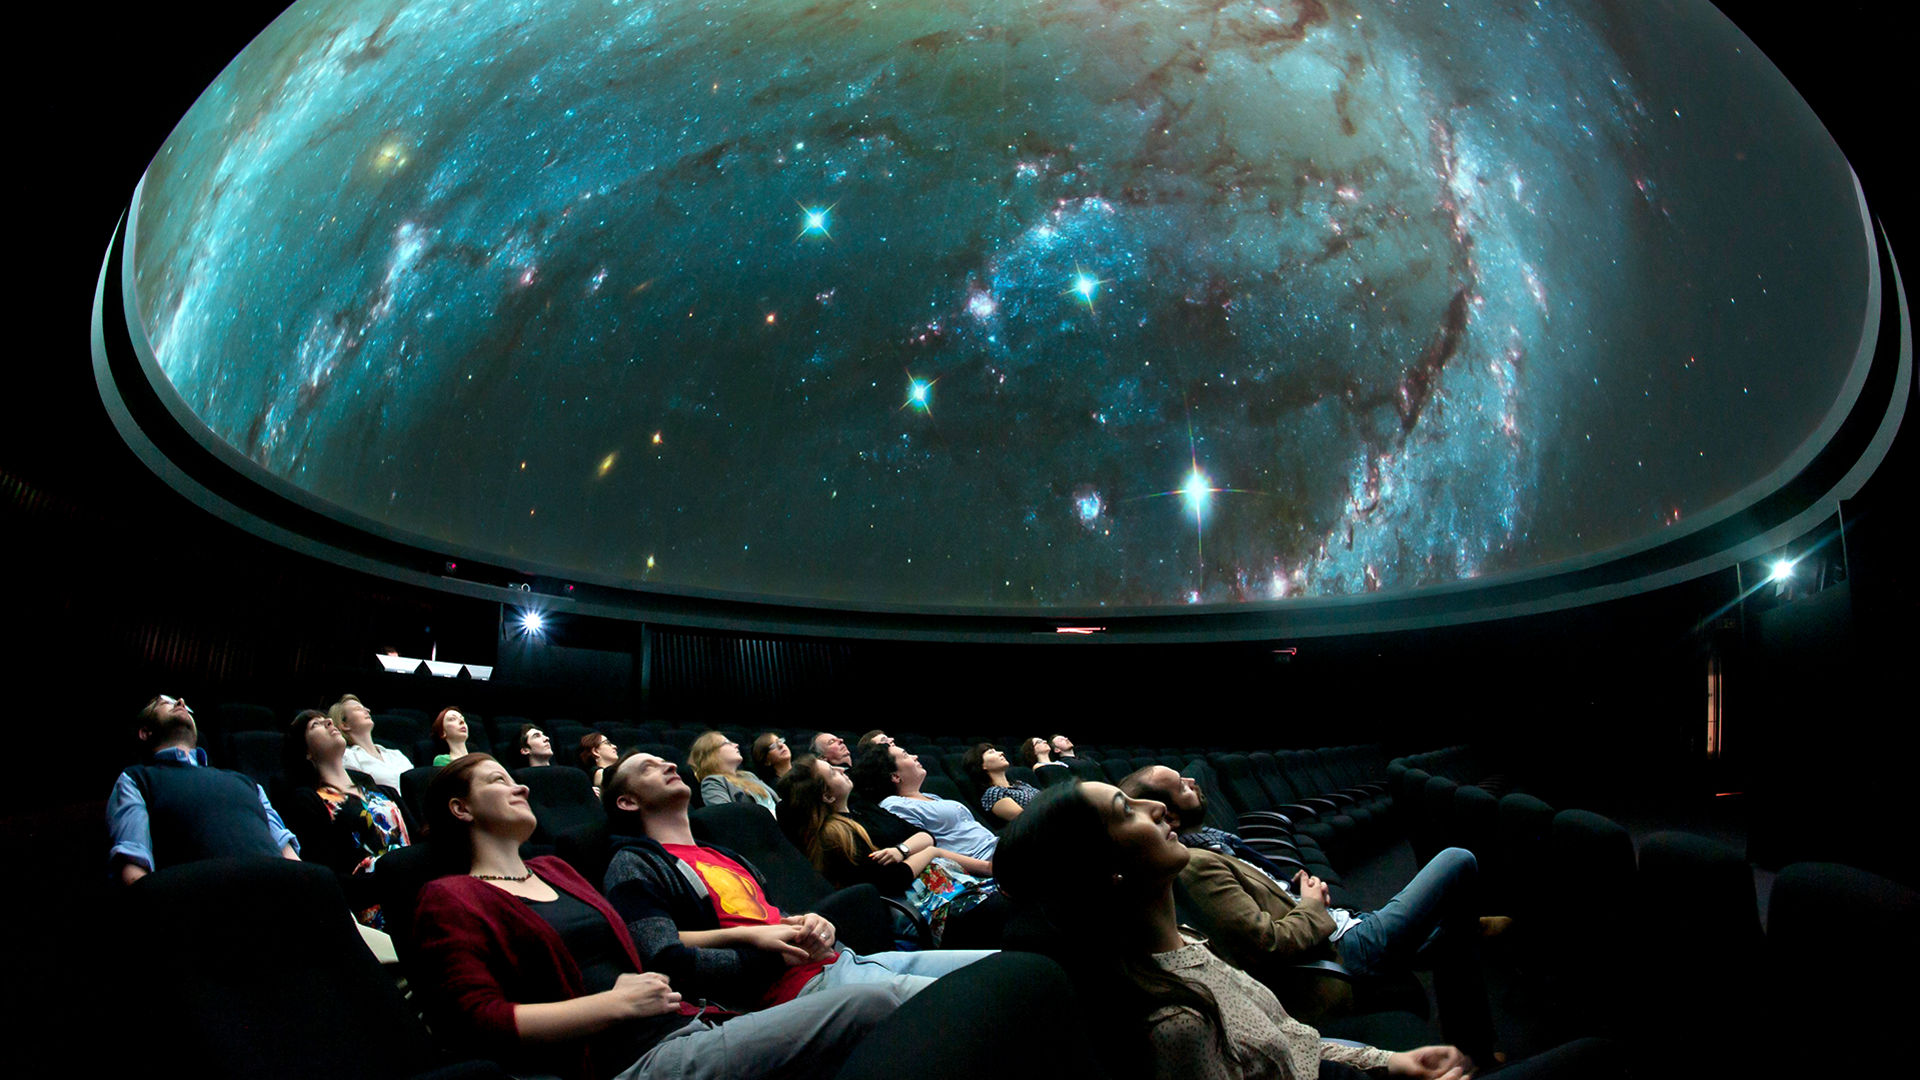 The International Day of Planetariums 2021